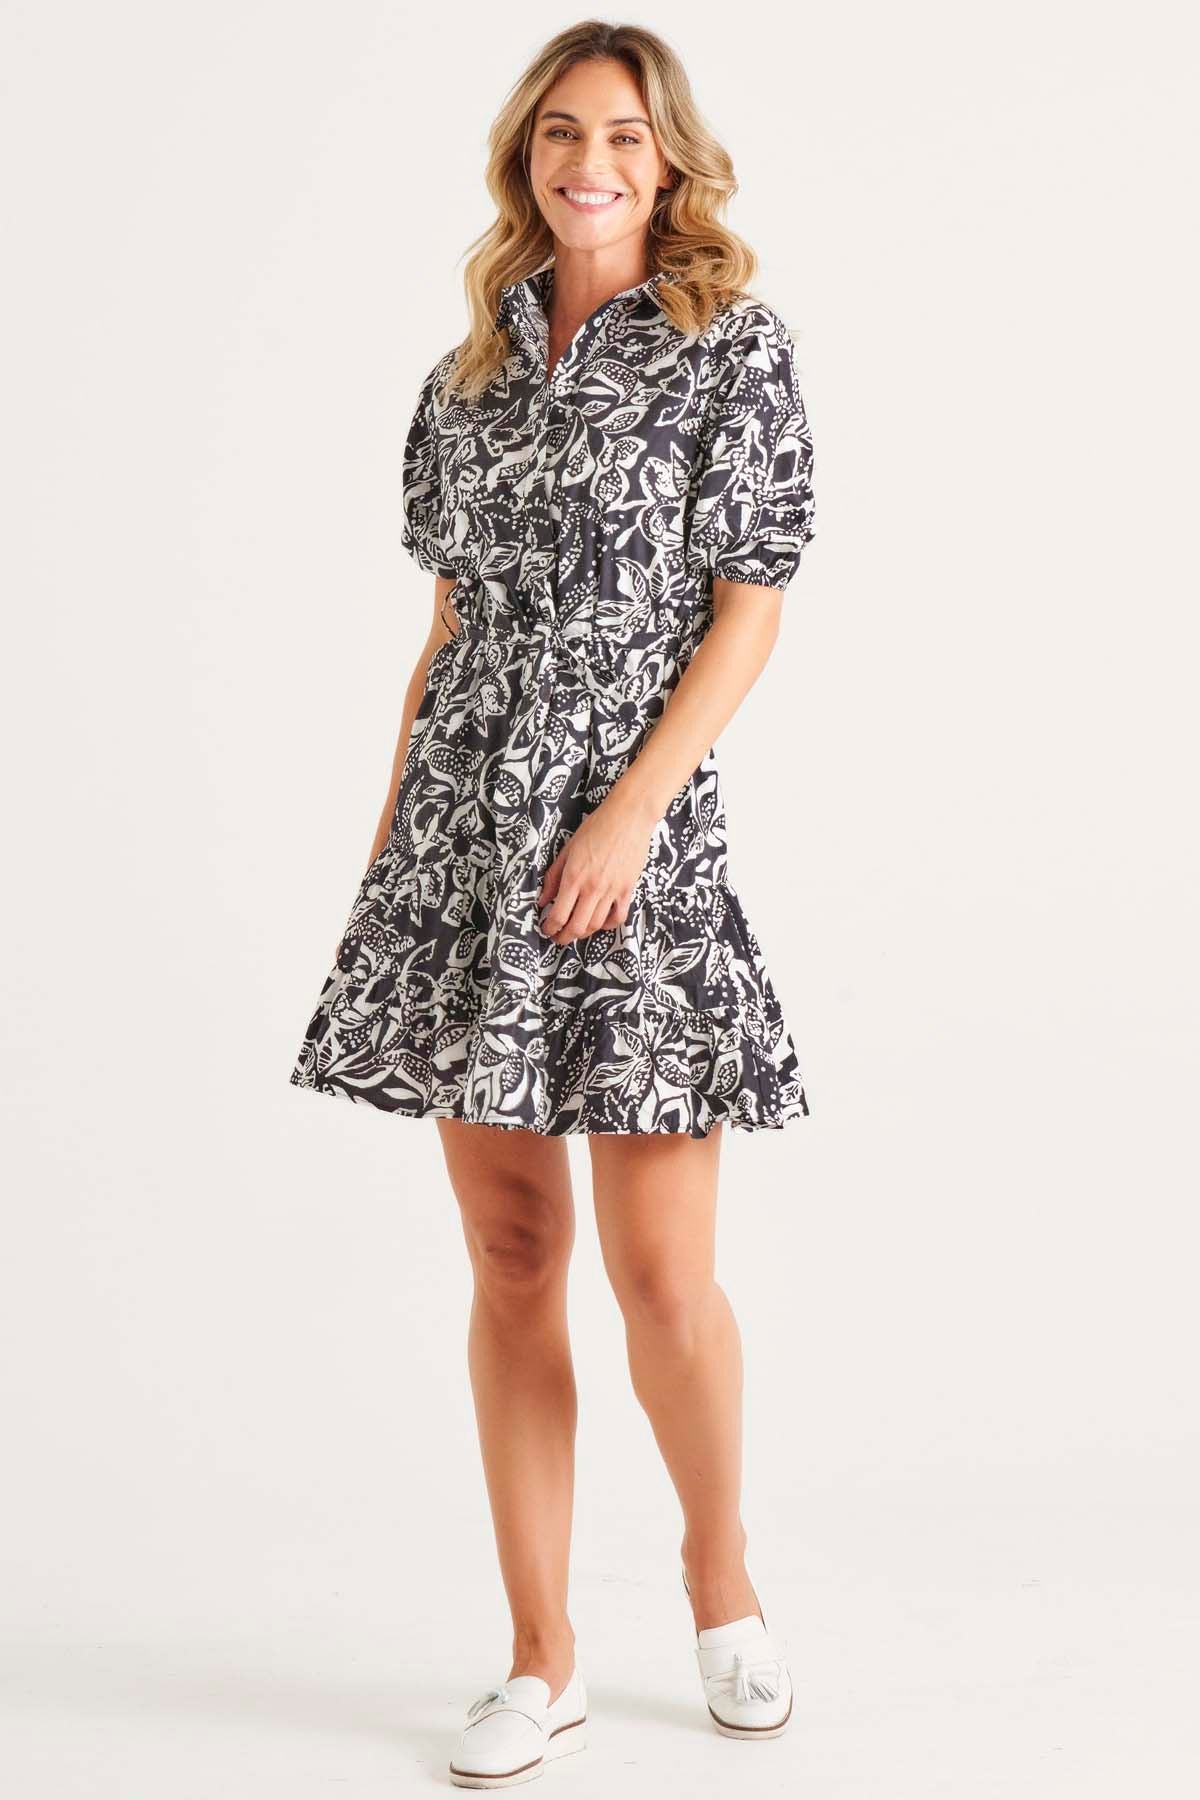 Betty Basics Marnie Dress in Floral Mono